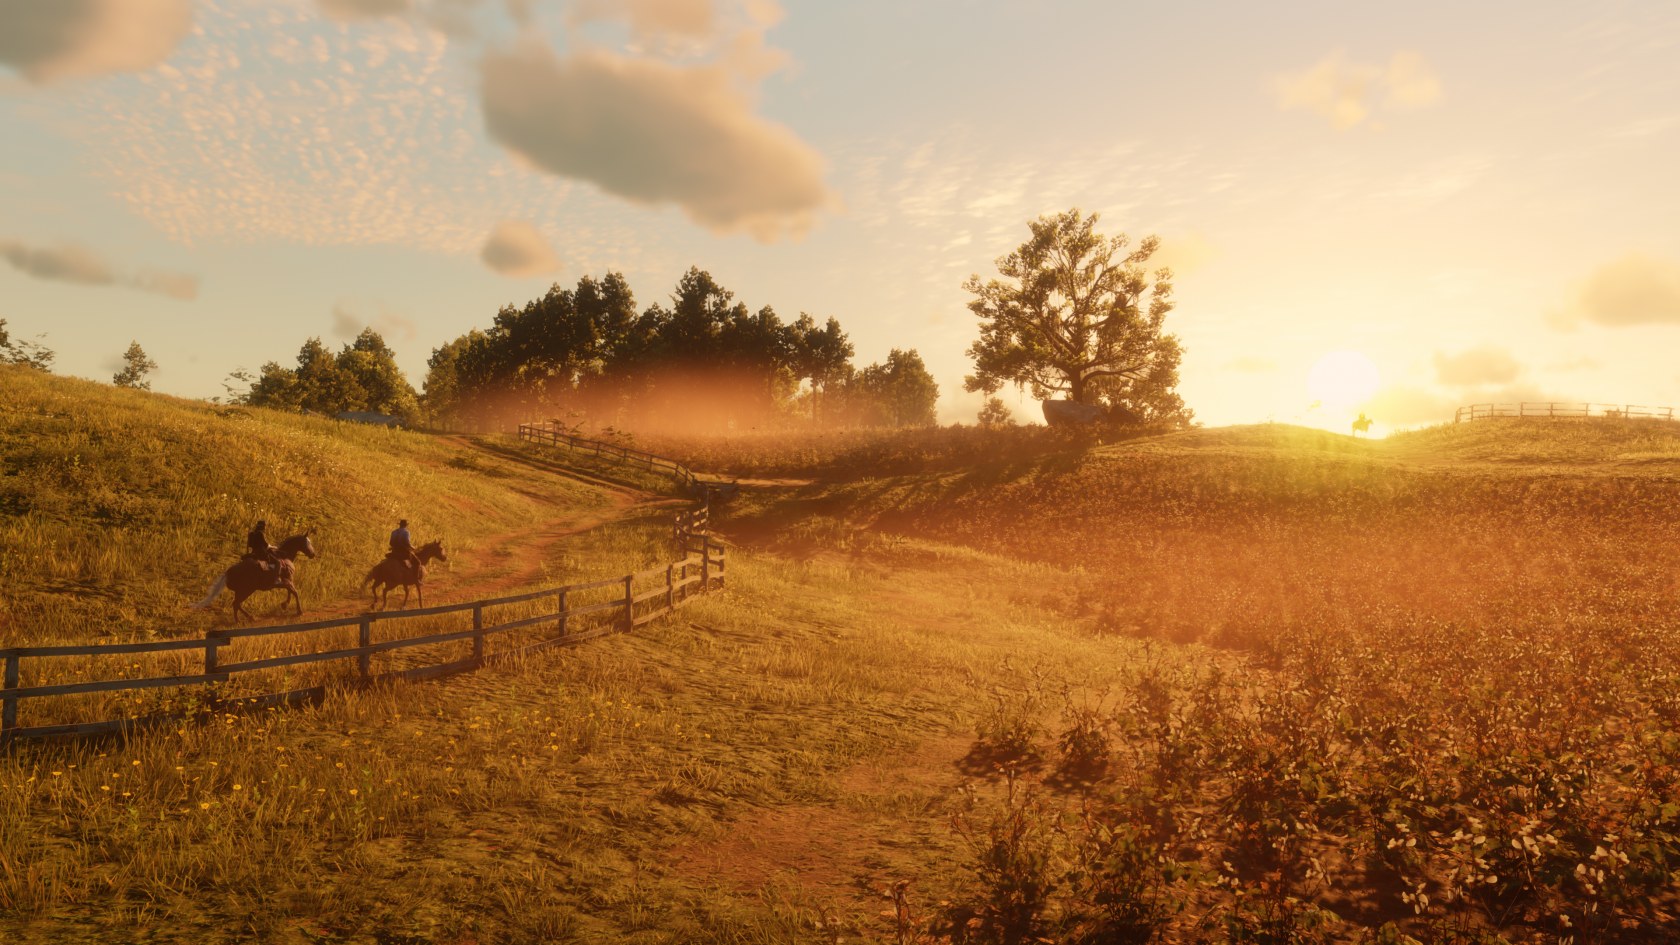 Rockstar says update your graphics drivers to fix Red Dead Redemption 2's PC problems